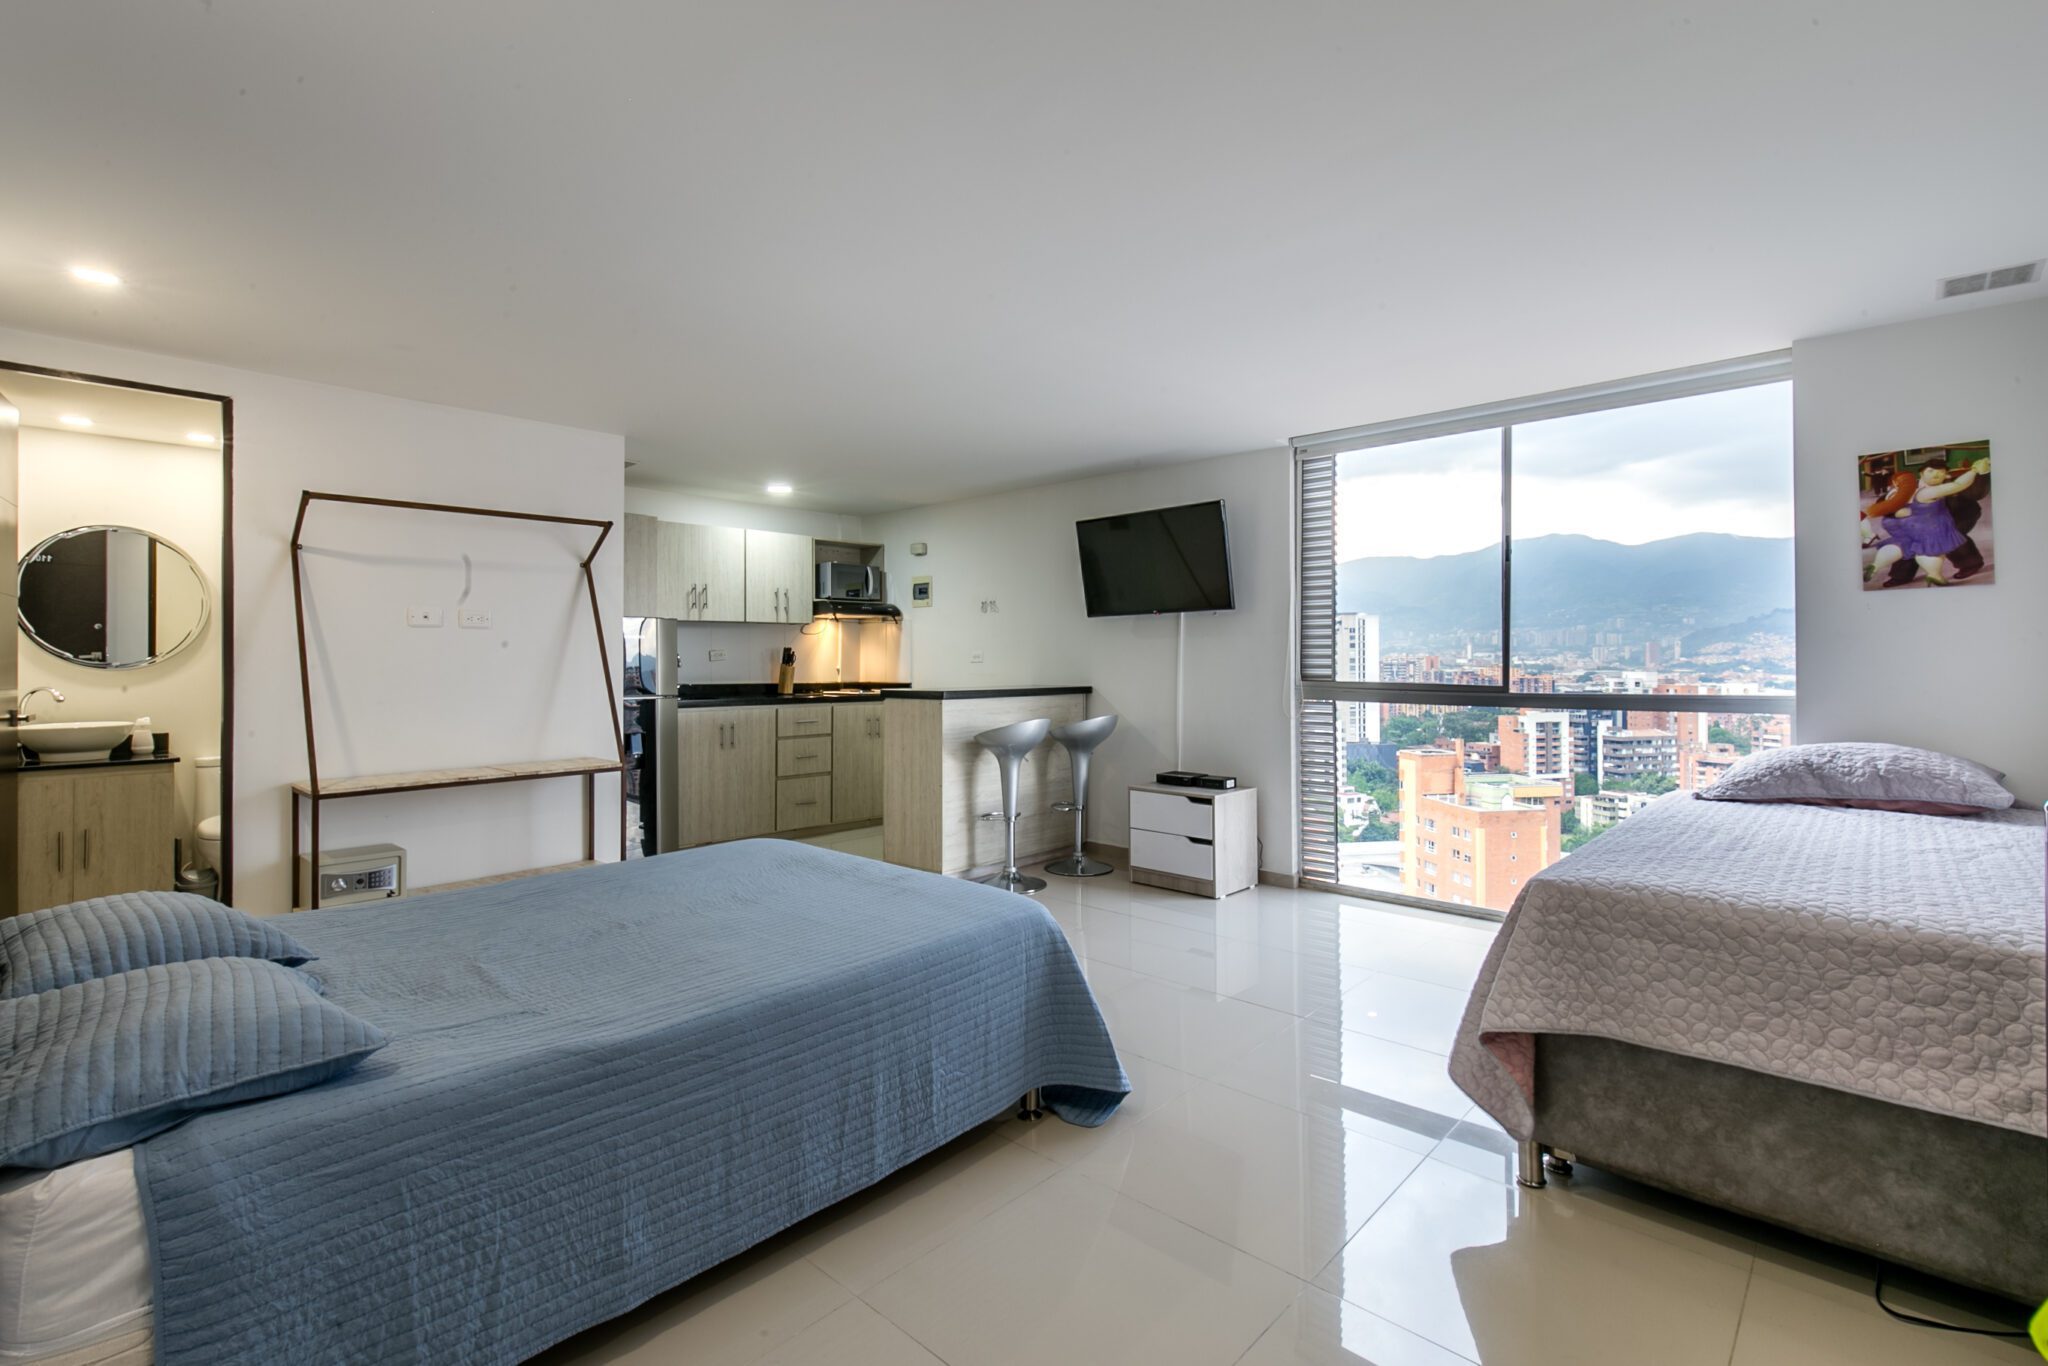 Price Reduced! The Lowest Priced Short-Term Rental Apartments In El Poblado WIth Low HOA Fees, Shared Rooftop Terrace, and Turnkey Pricing